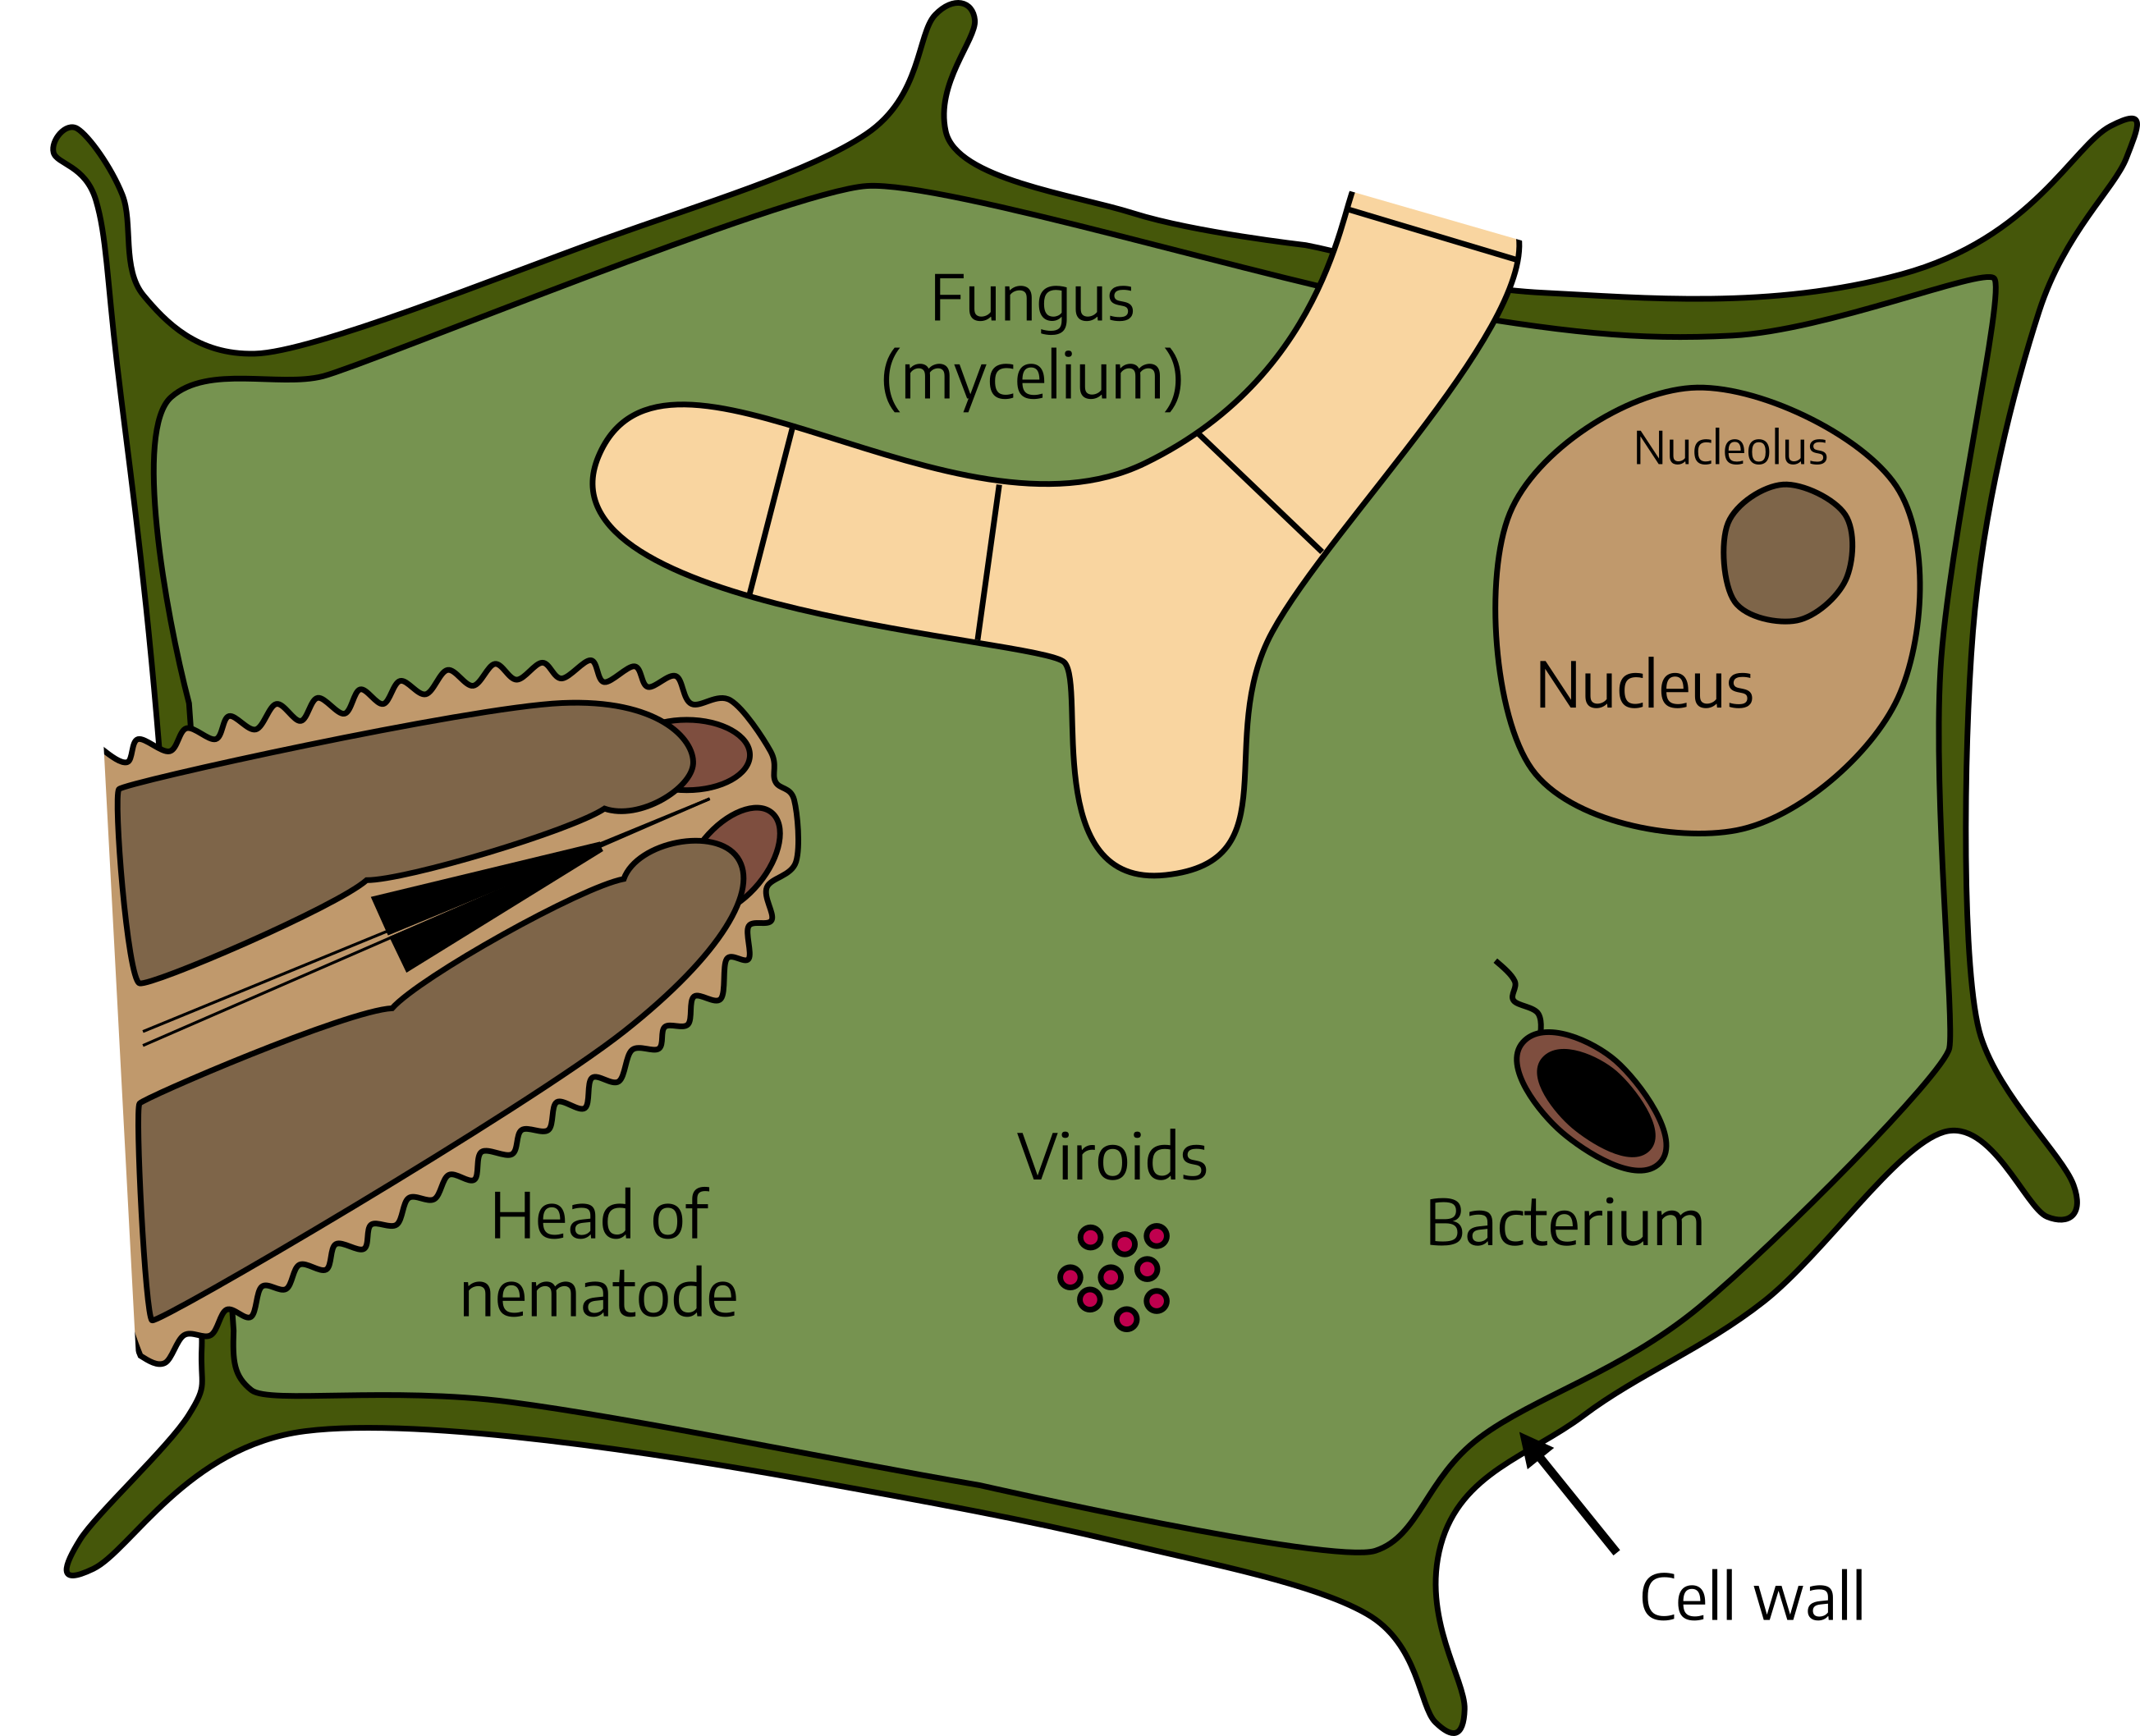 A diagram of a roughly rectangular plant cell showing the size relations between plant pathogens compared to the cell size. Fungus protrudes into the cell and is larger than the nucleus, but smaller than the head of a nematode also protruding into the cell. Bacterium (much smaller than fungus, roughly the size of the nucleolus) and tiny viroids exist within the cell.